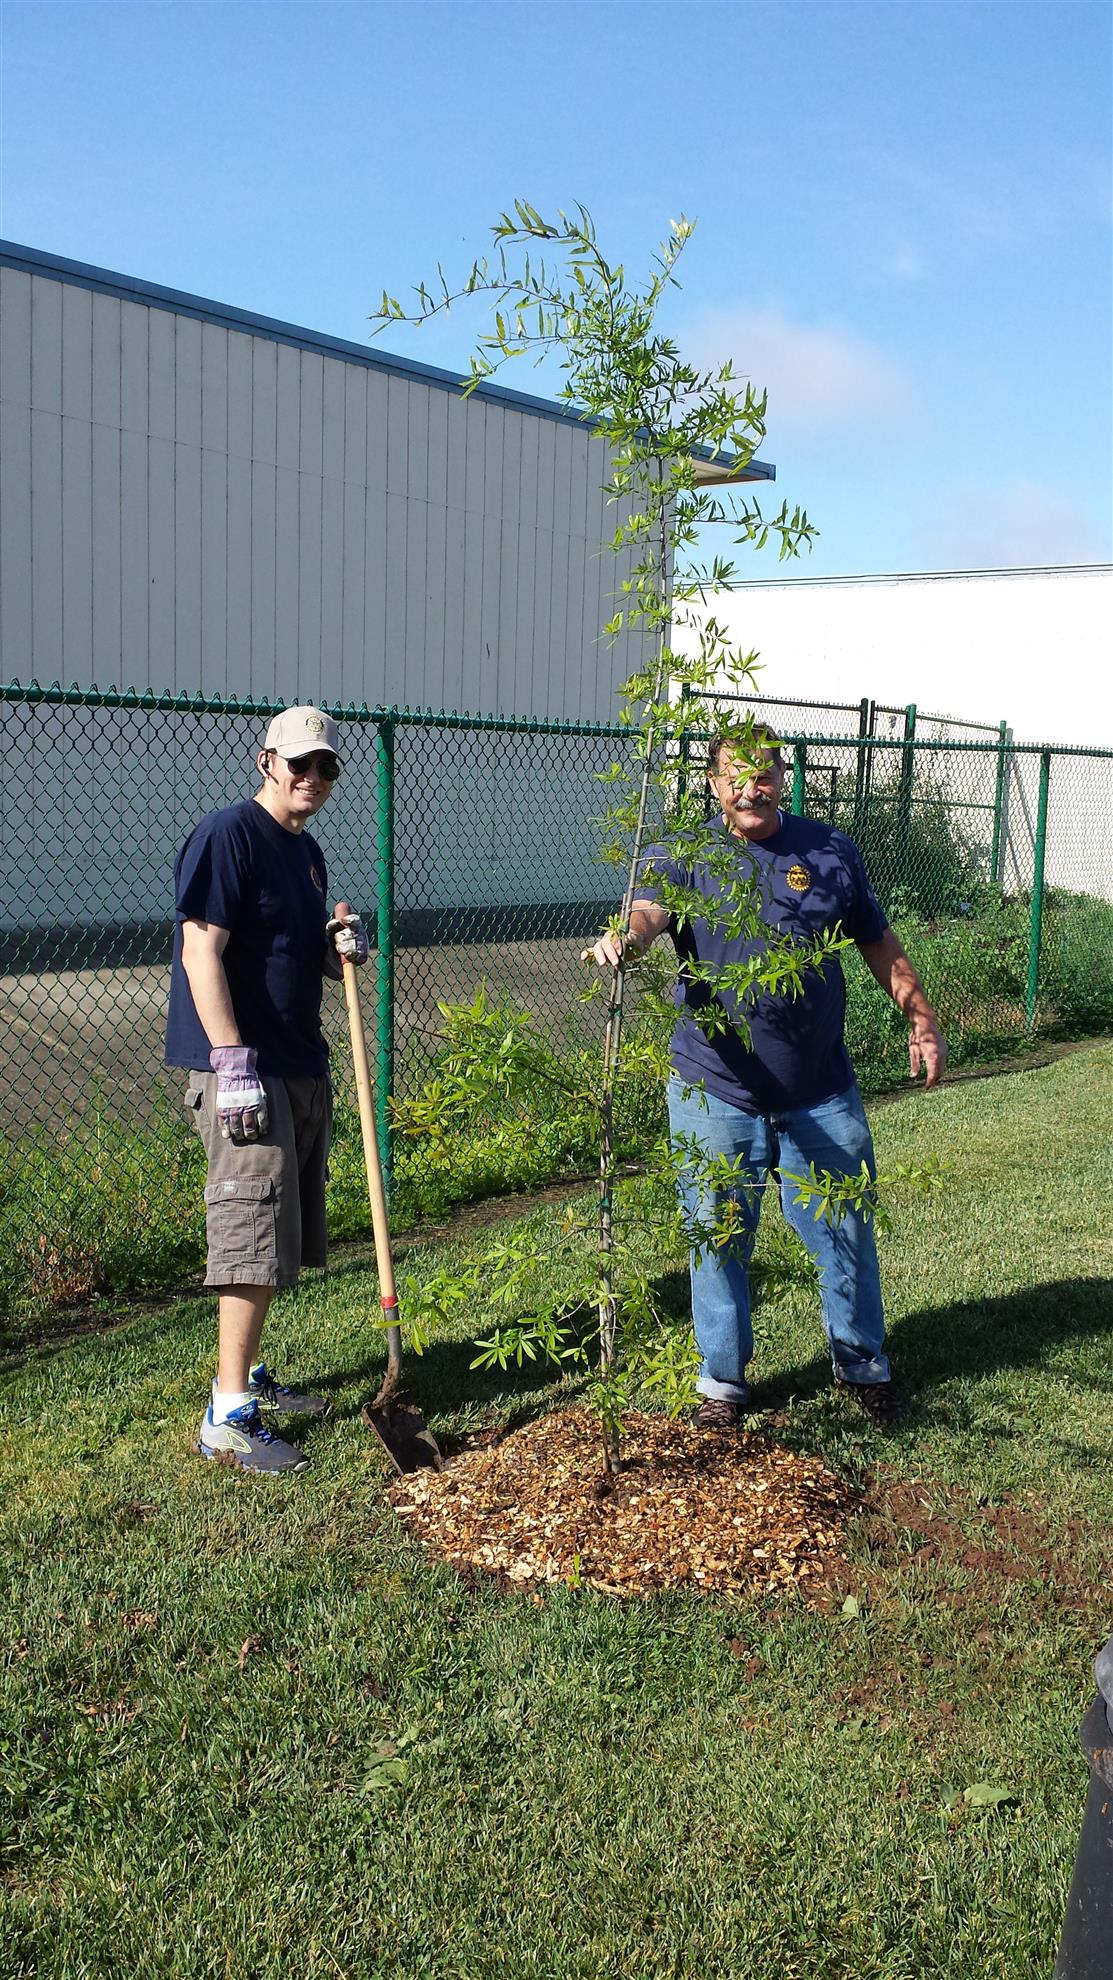 Community Service - Arbor Day Tree Planting | Rotary Club of West ...